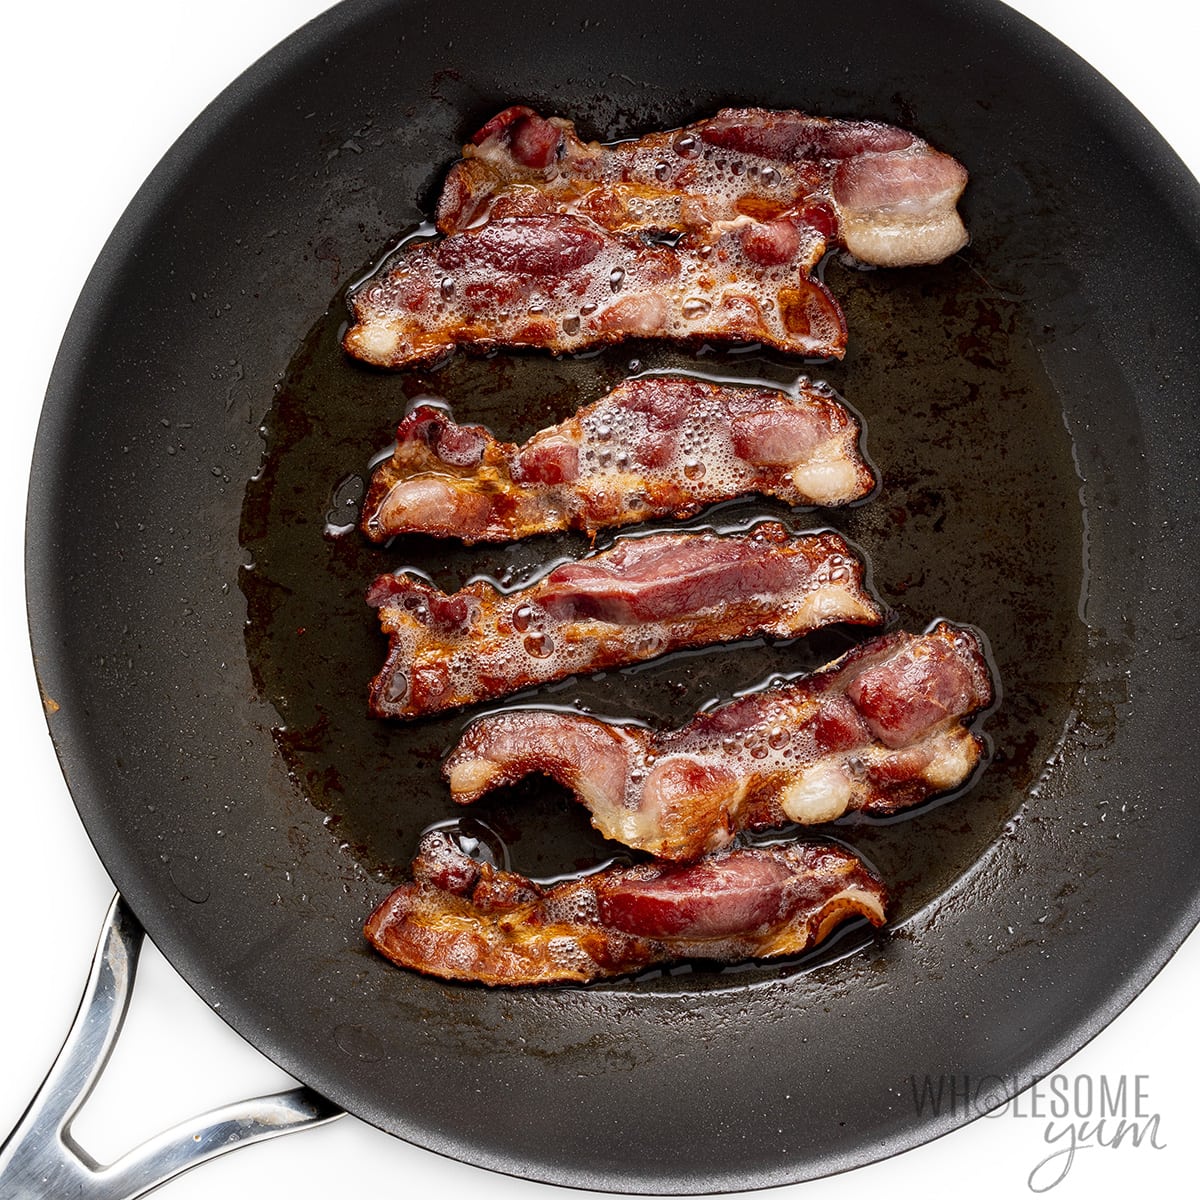 Bacon slices cooking in a skillet.